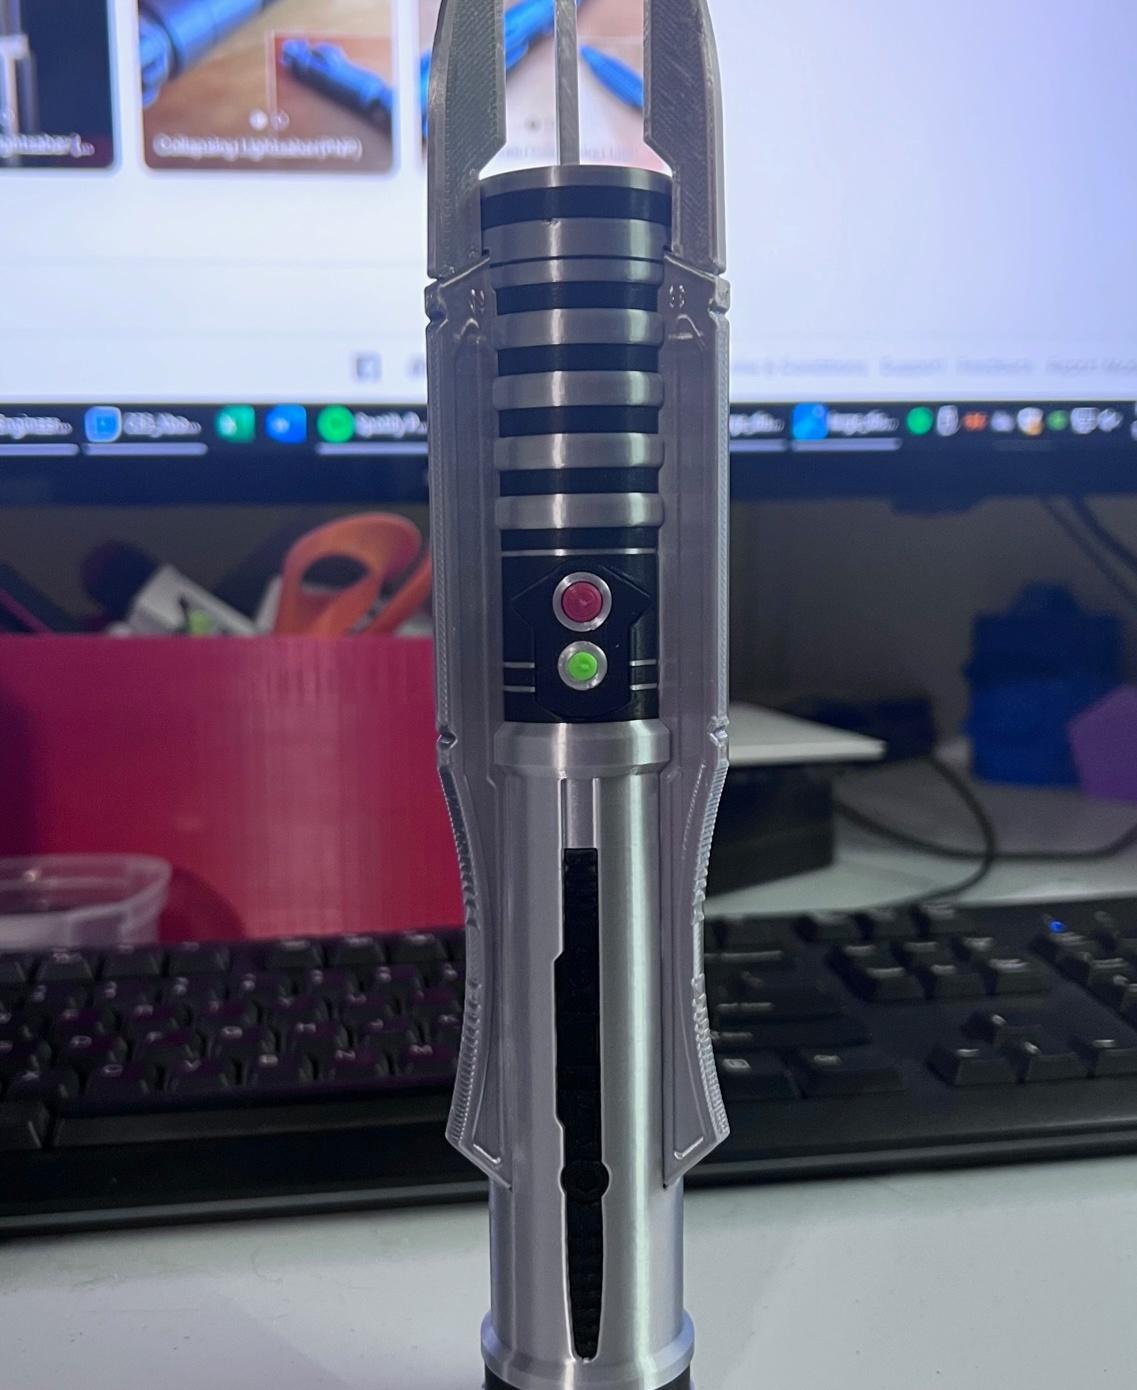 Revan’s Collapsing Lightsaber - Another winning design and very fun to print as always.  I love the extra detail and colors that can be gotten from doing these types of designs with just a single filament extruder.  Keep them coming and I'll keep on printing them. - 3d model